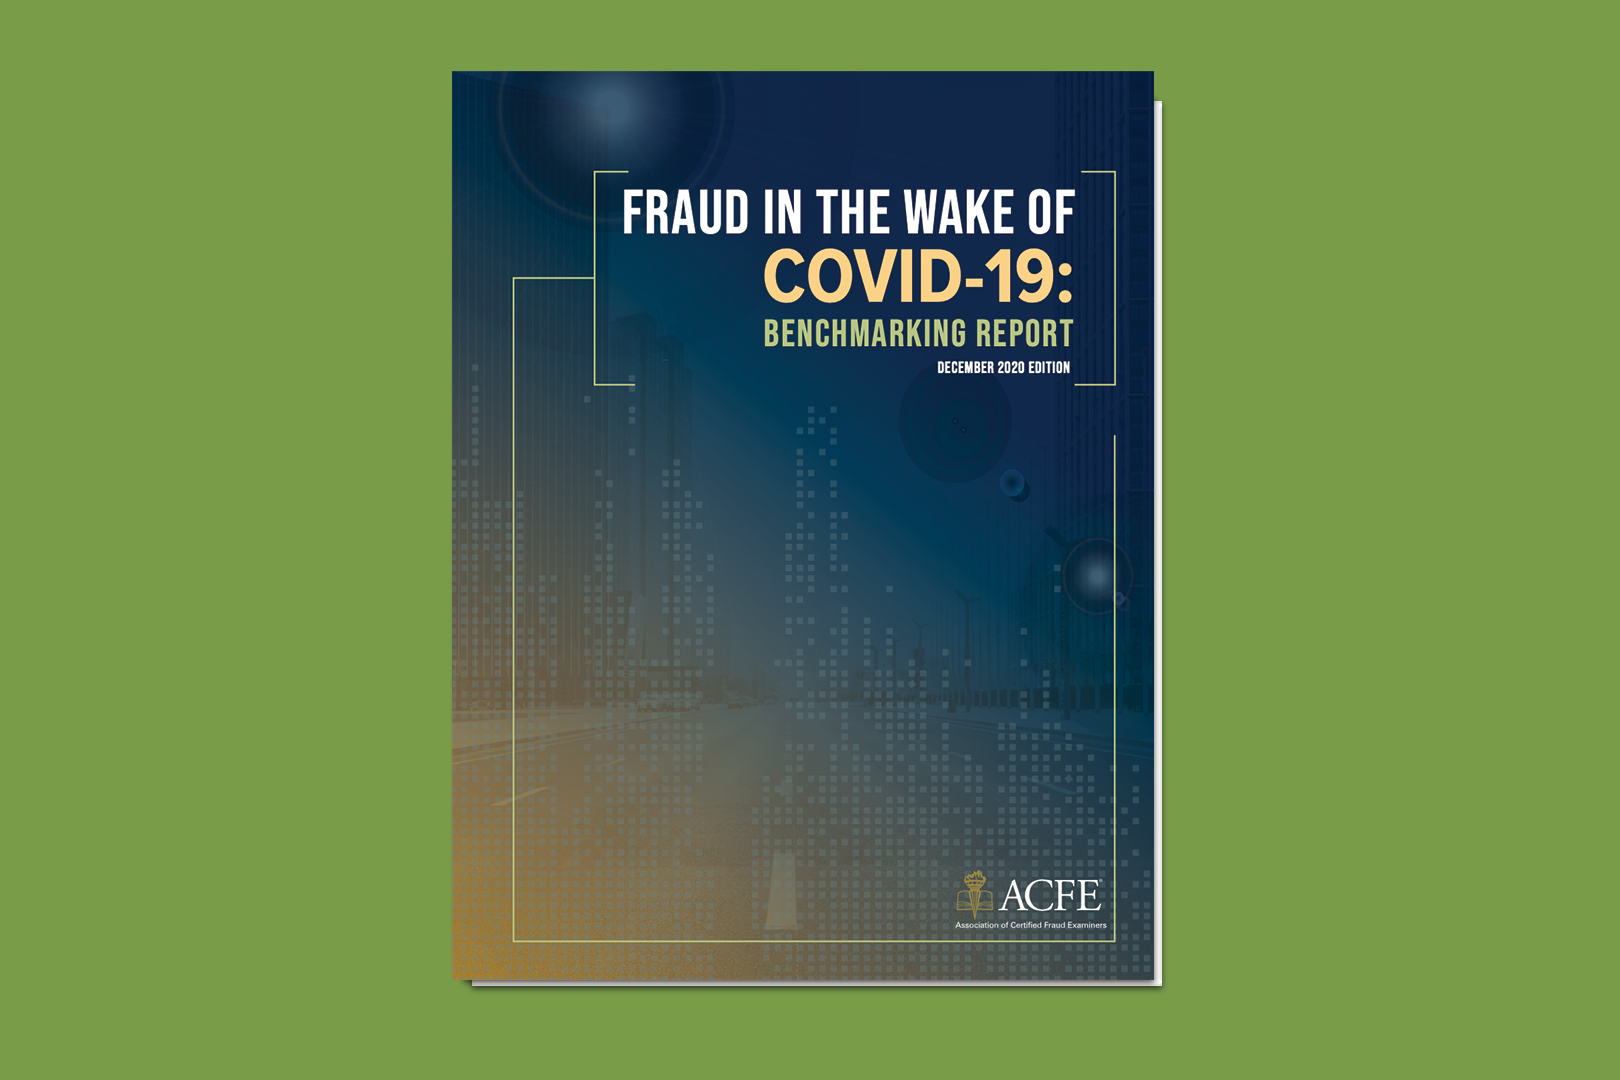 Abstract Fraud in the Wake of Covid-19 report cover over a green background